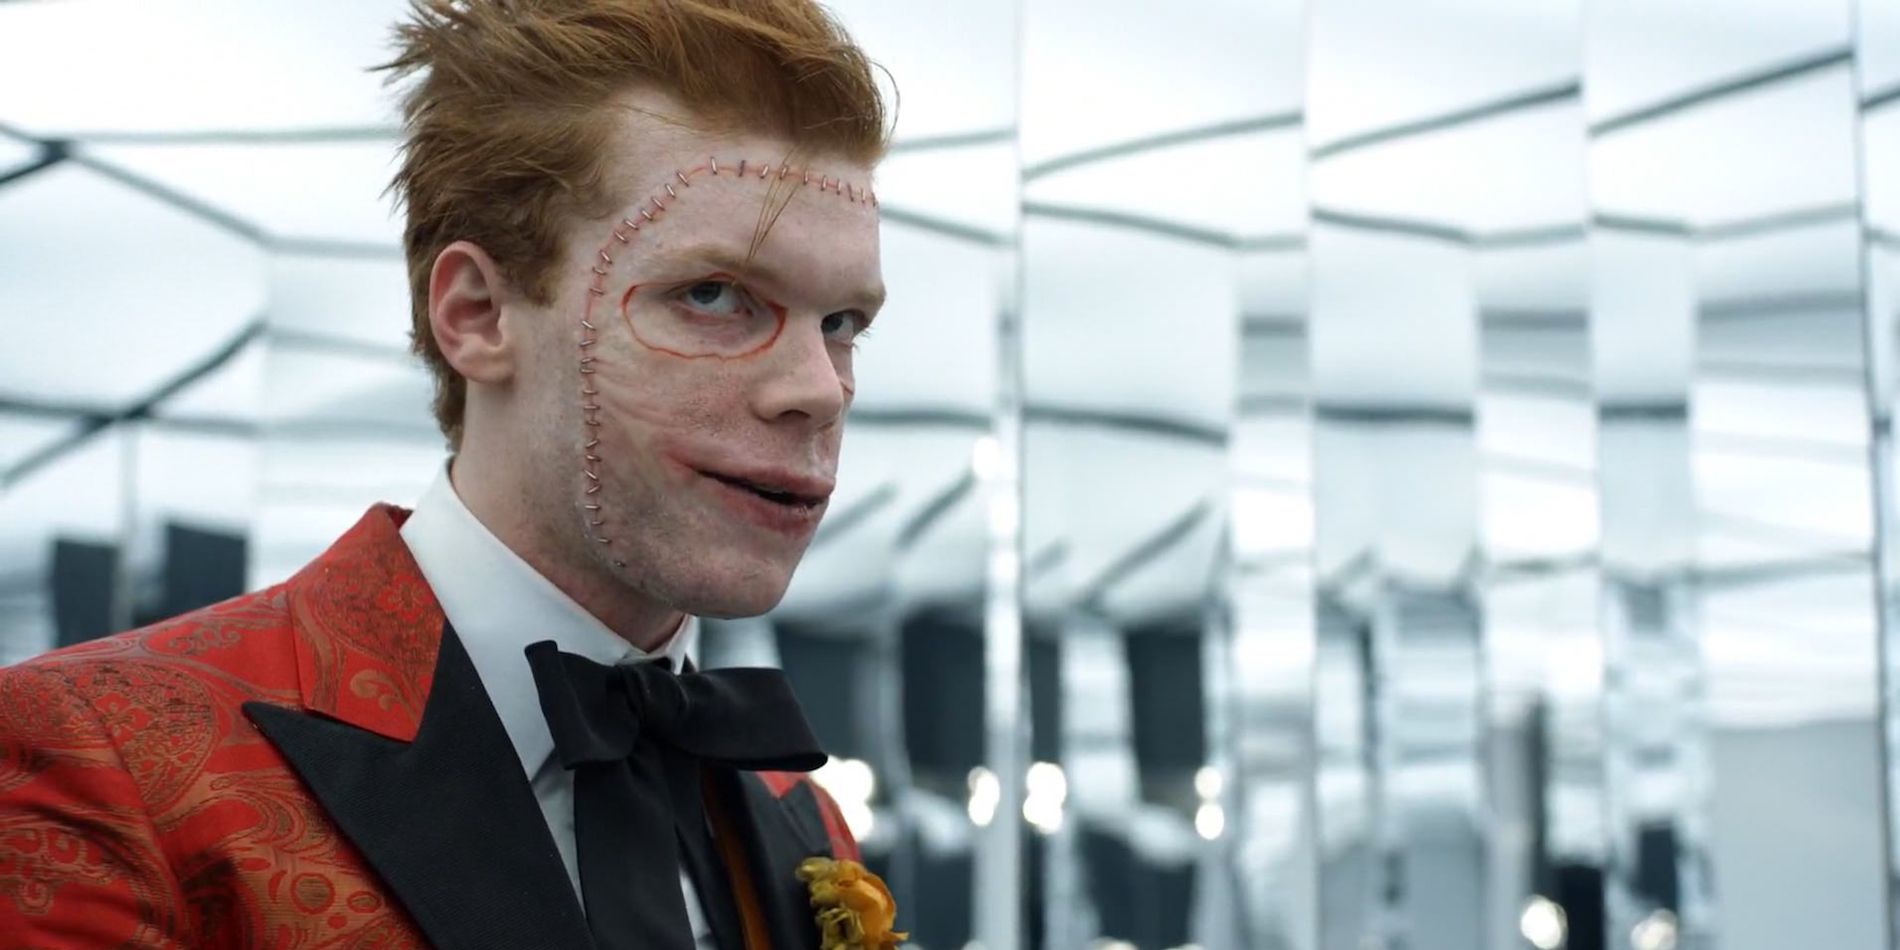 Gotham Jerome Isnt The Joker But Cameron Monaghan Might Still Play Him